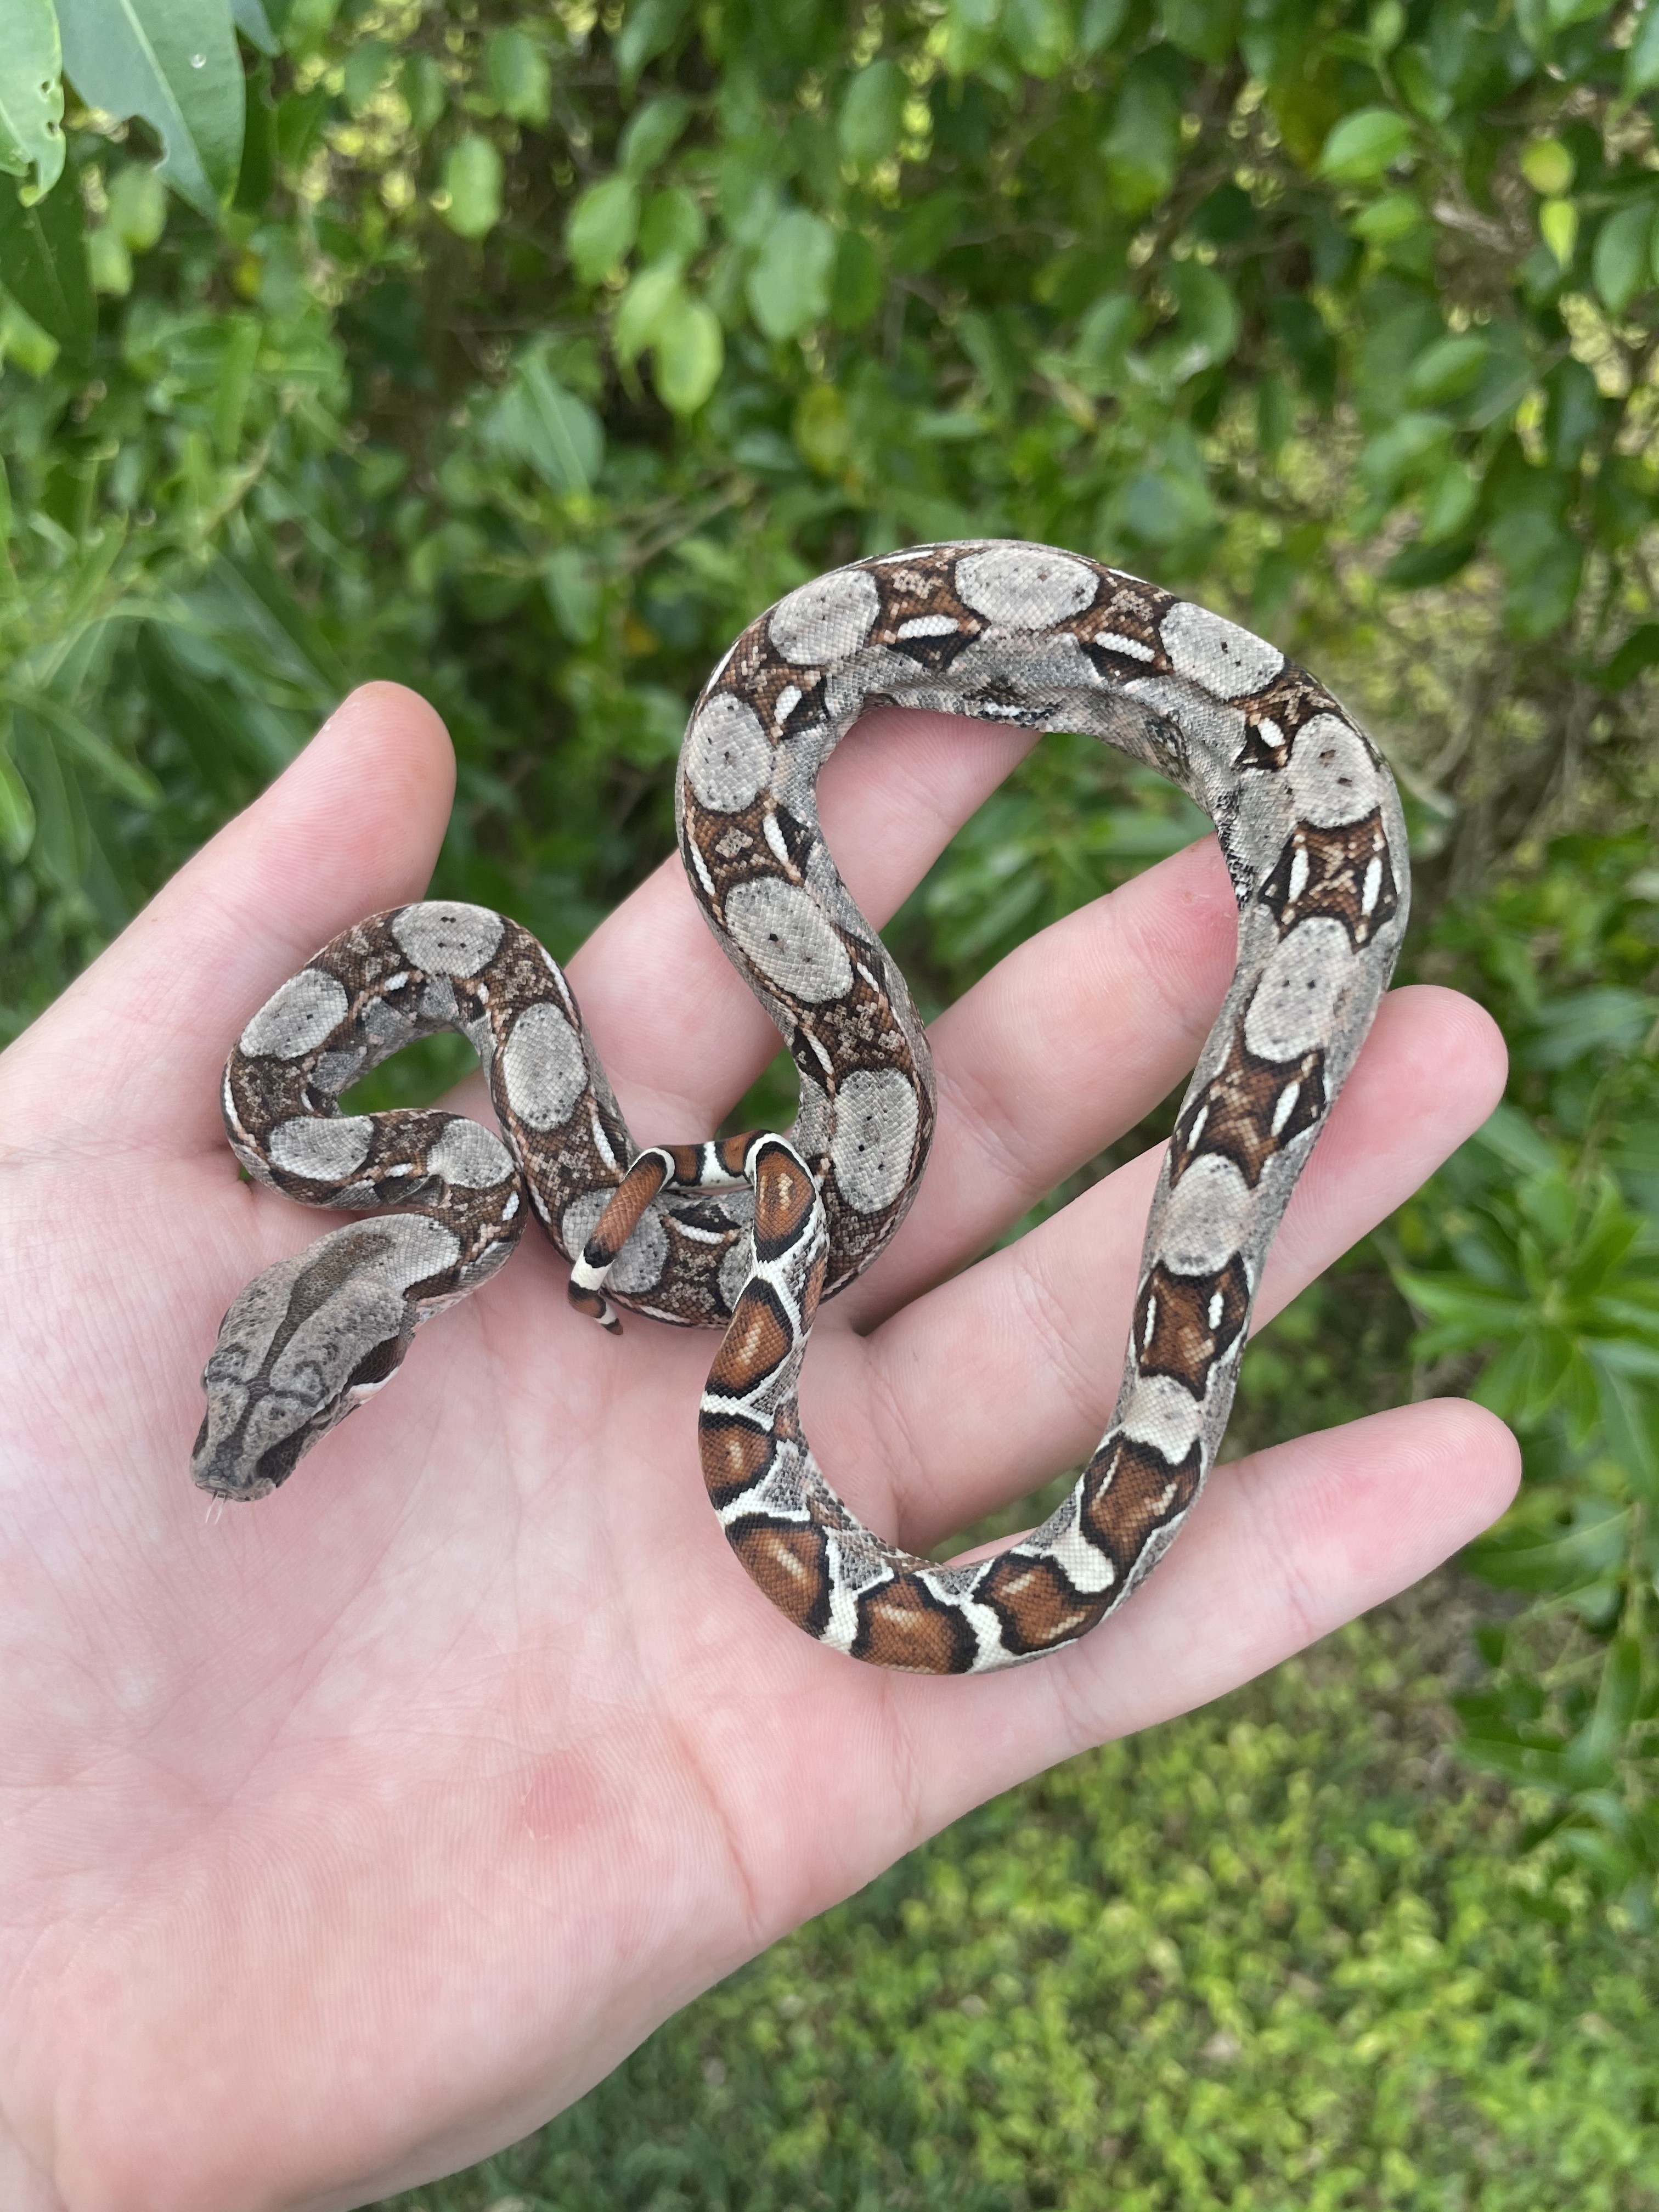 Normal Boa Constrictor by O.t.w exotics